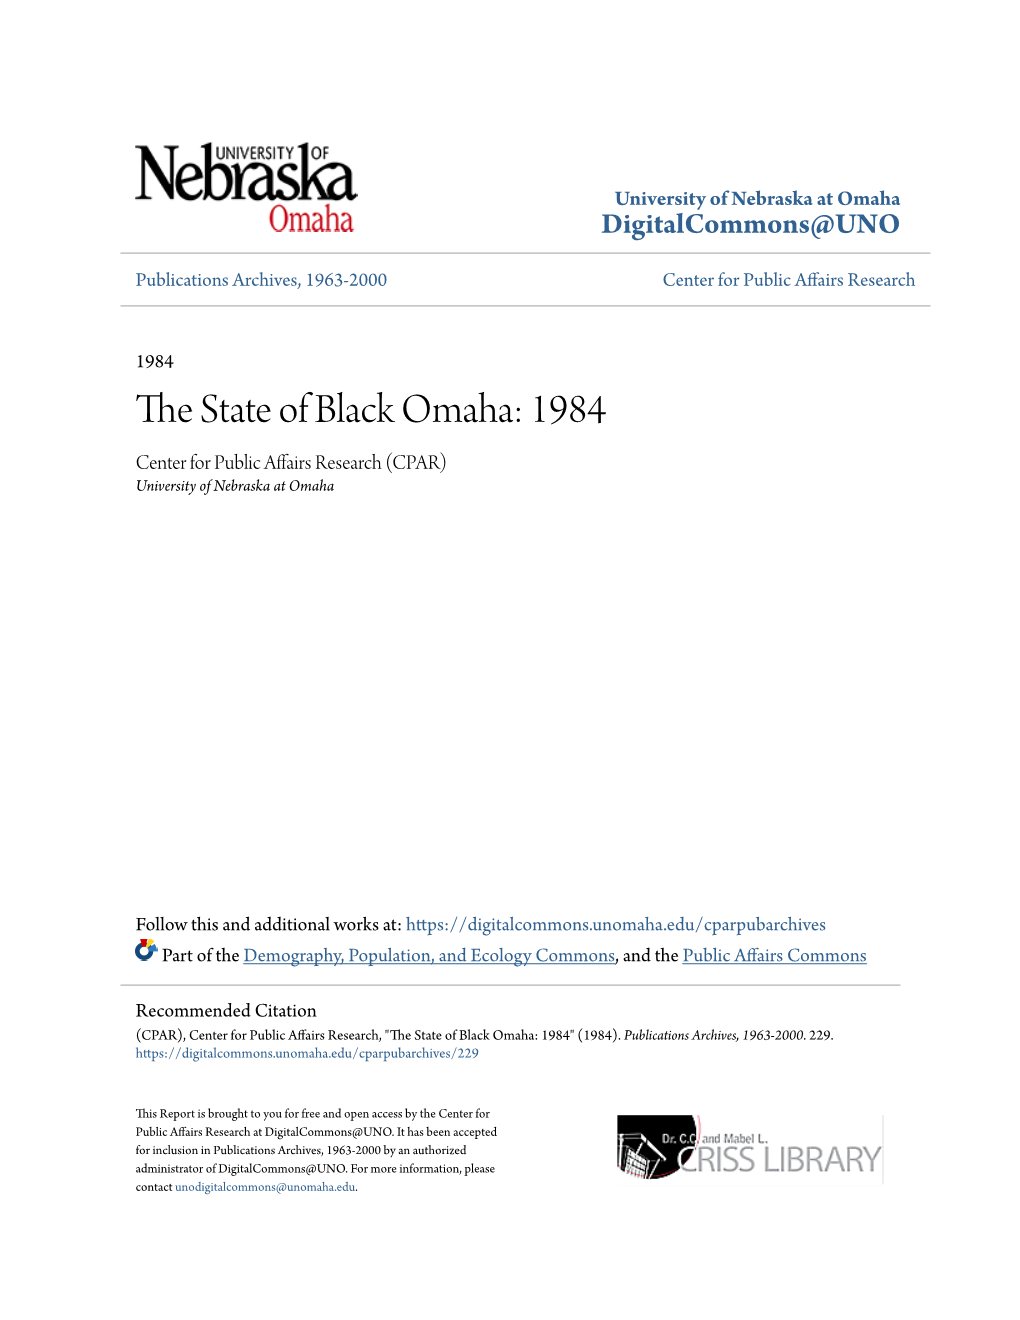 The State of Black Omaha: 1984